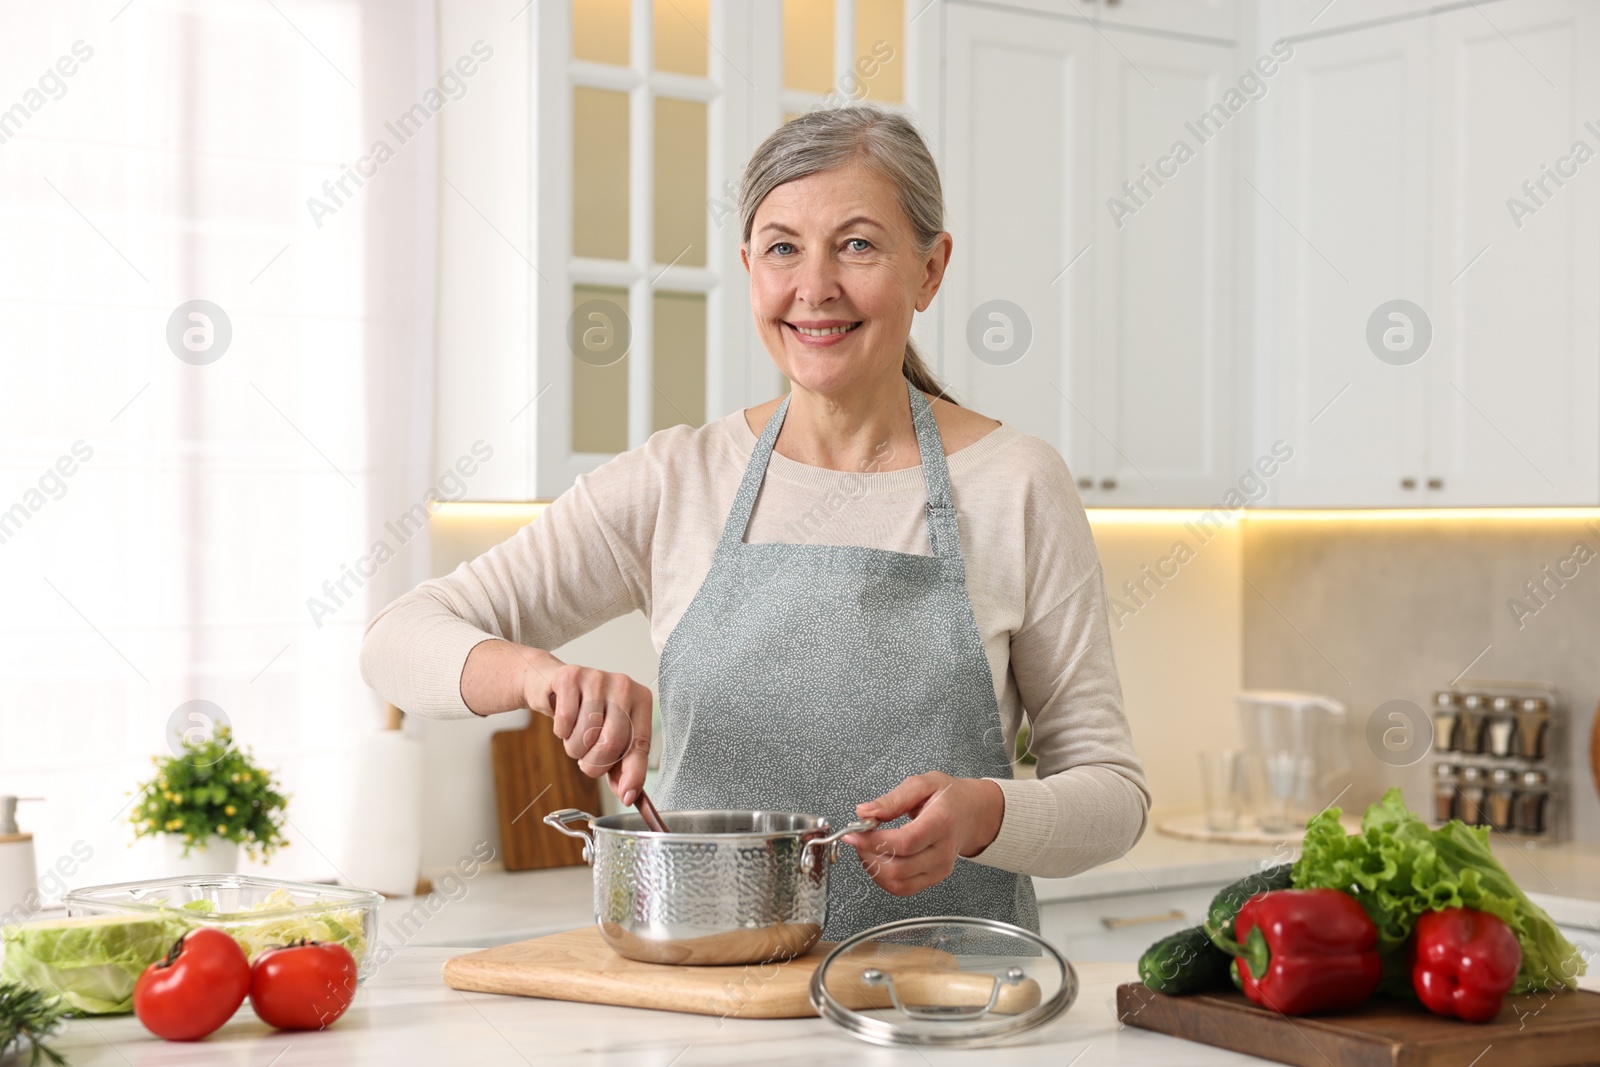 Photo of Happy housewife cooking at table in kitchen